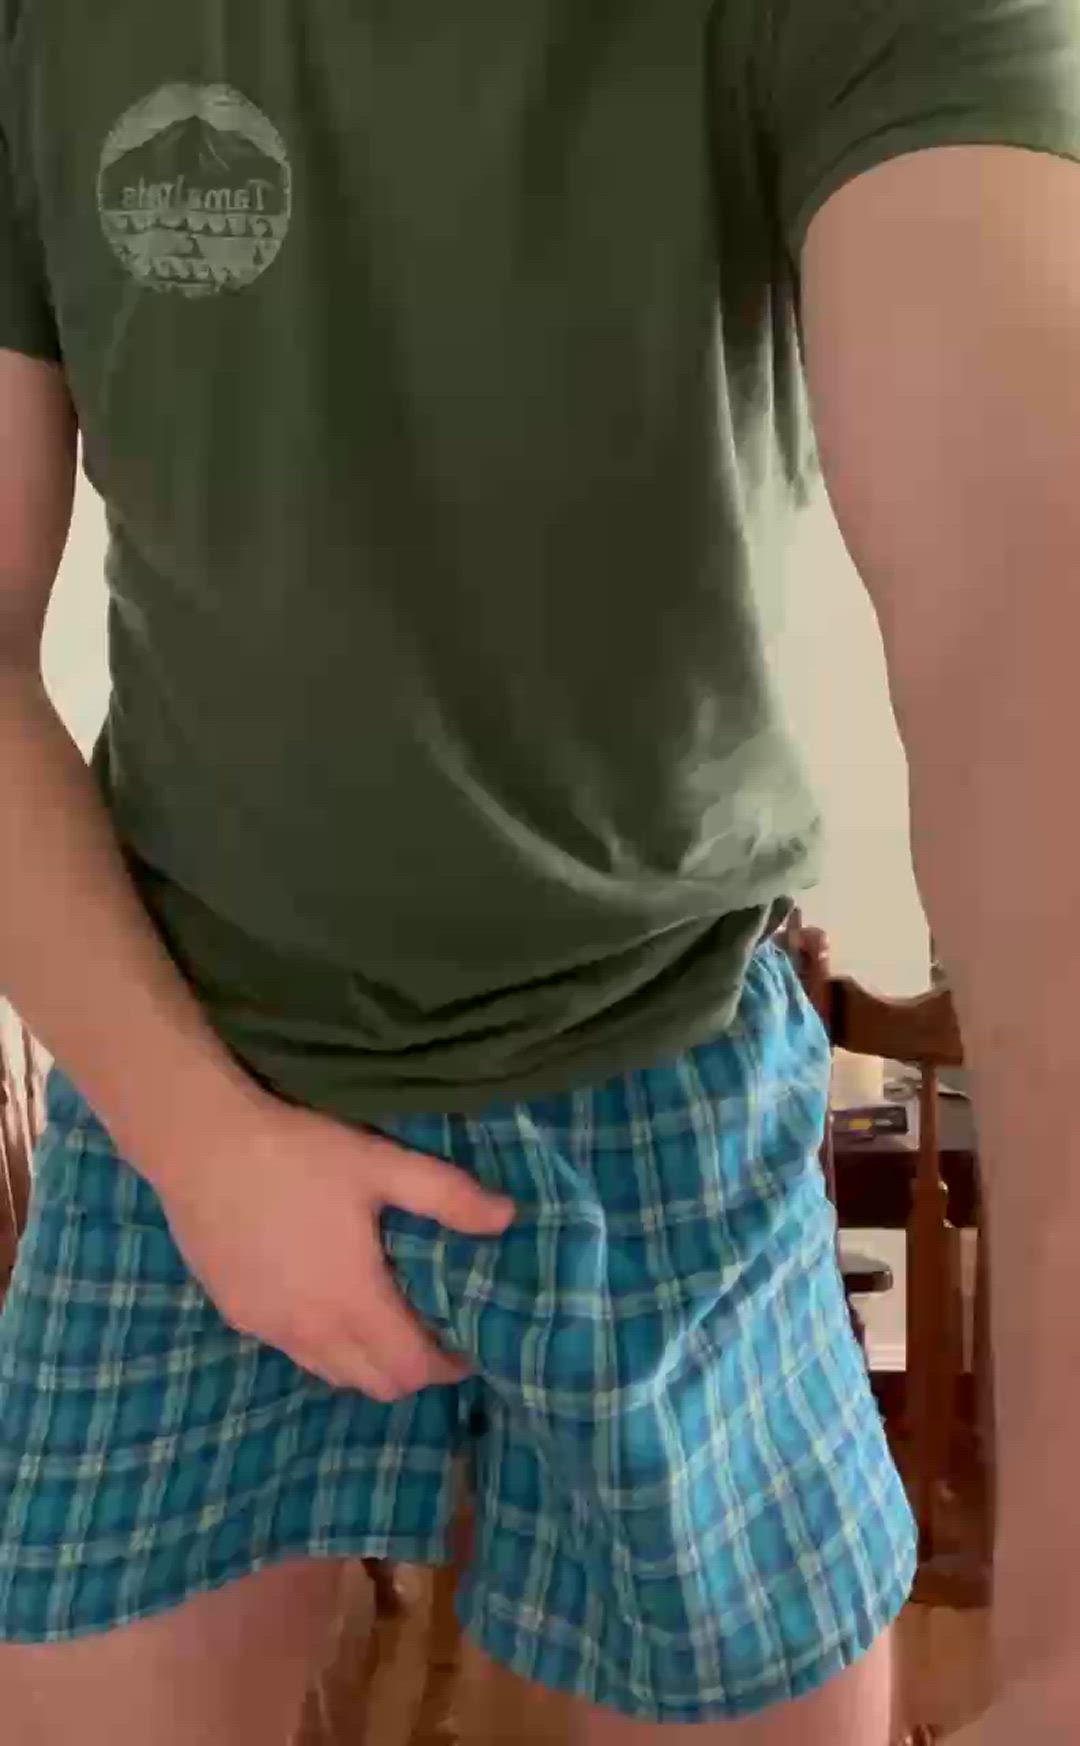 Gay porn video with onlyfans model daddydownload <strong>@daddydownload</strong>